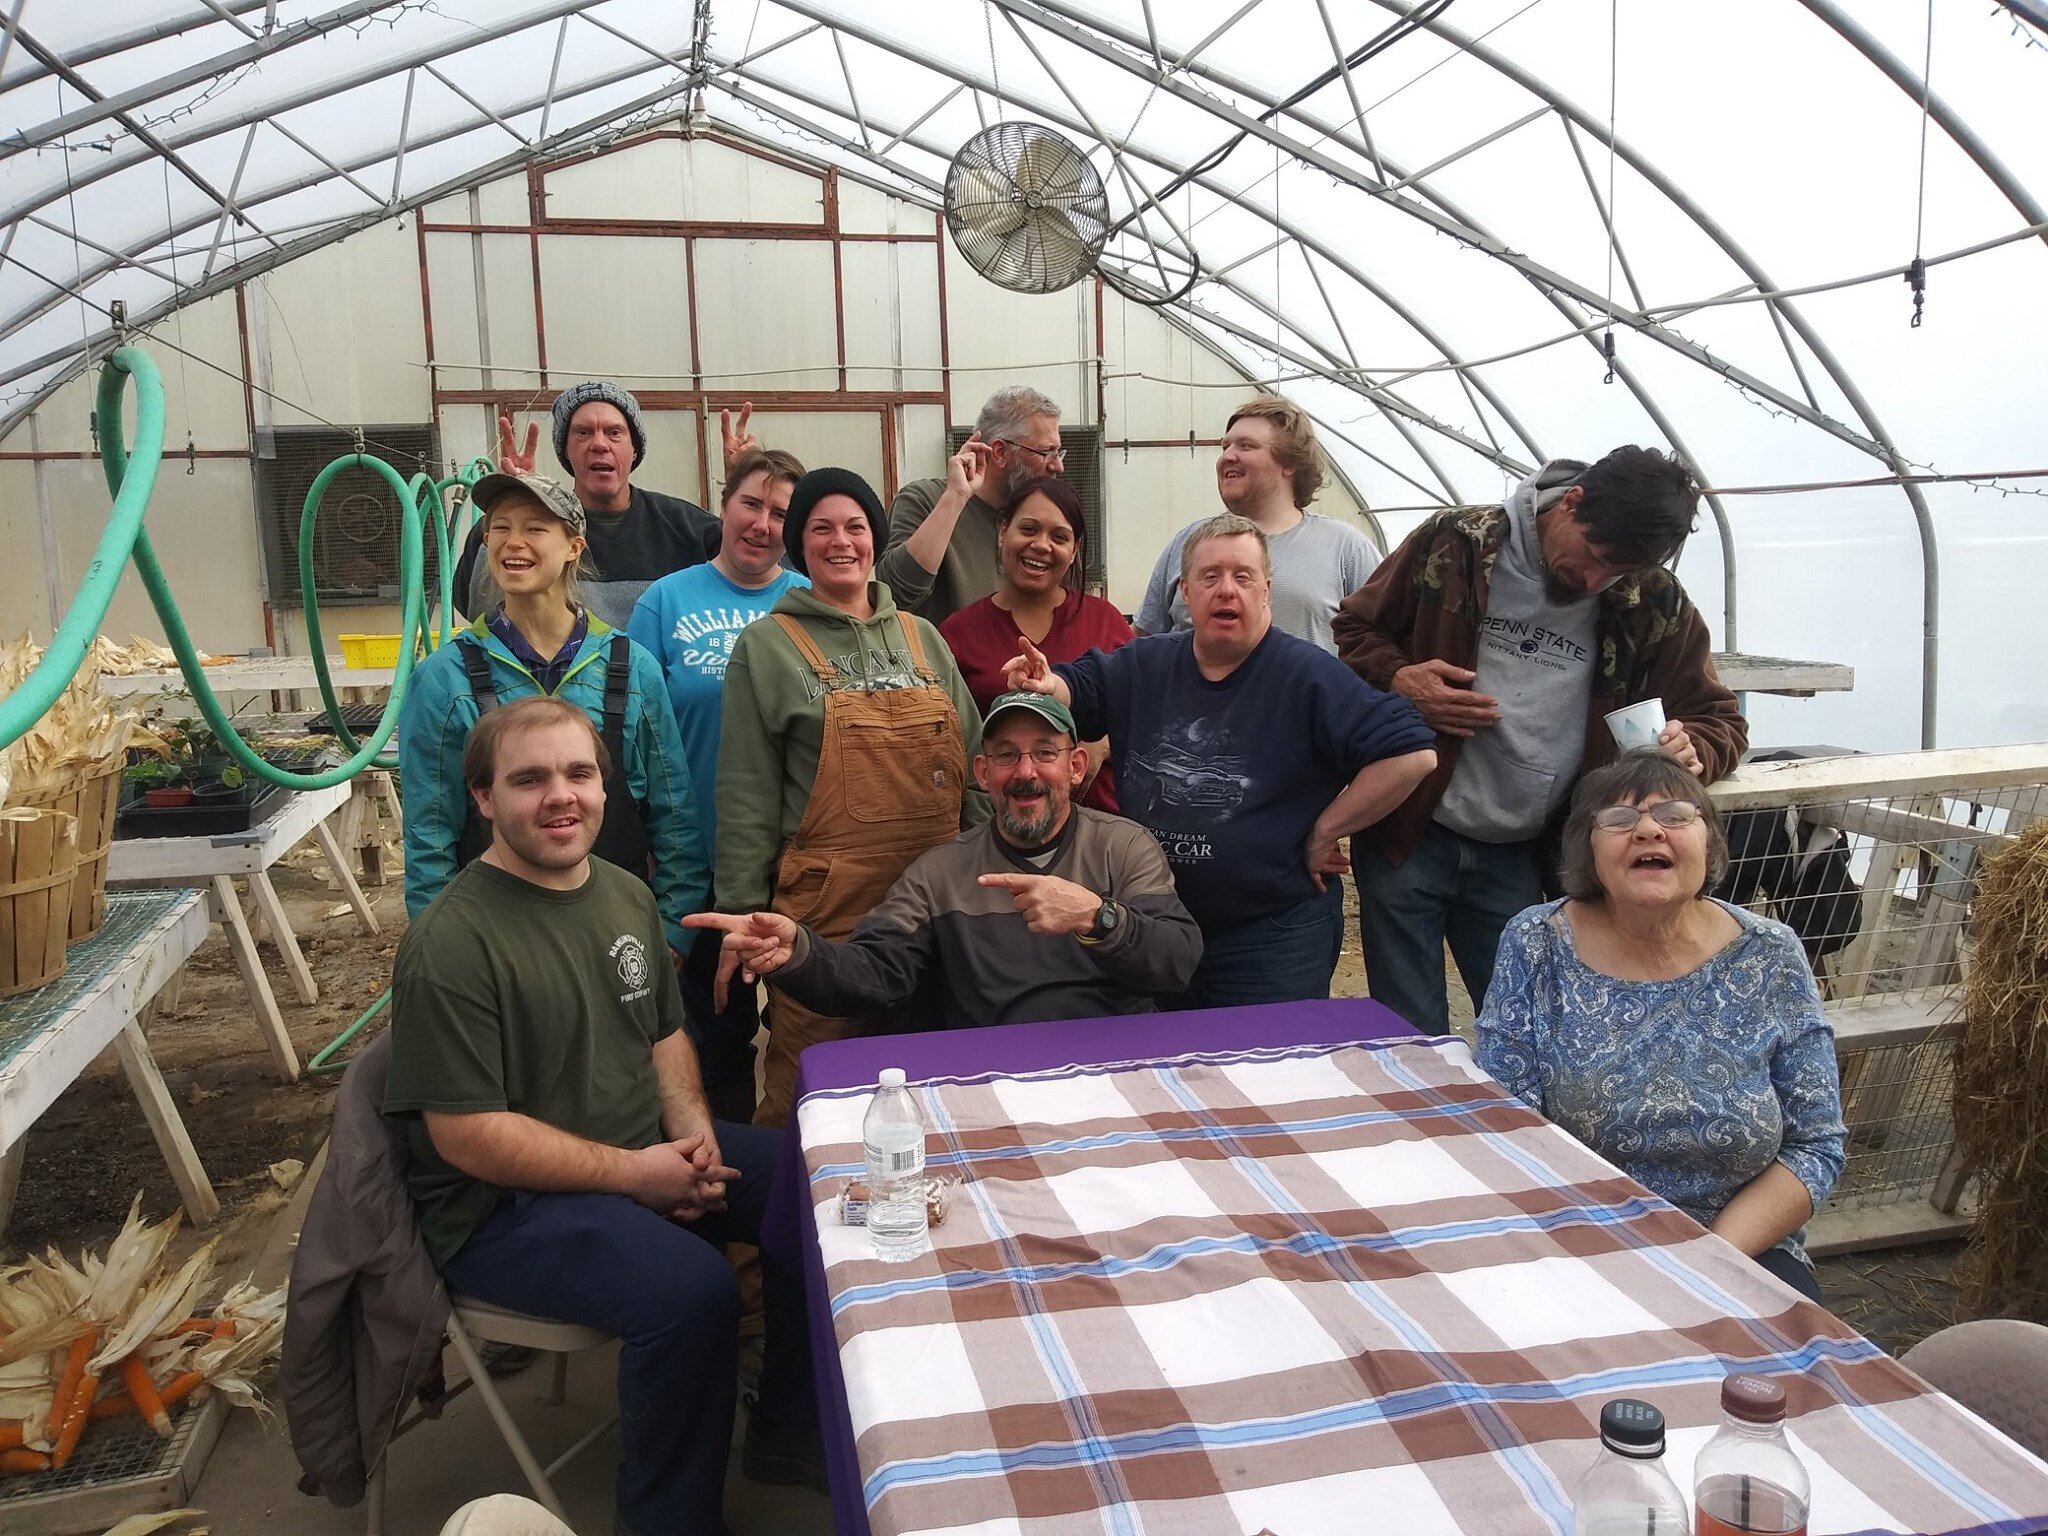  An amazing team from Occupational Development Center was here each week planting seeds, washing produce, getting storage crops ready for shareholders, and so much more. 